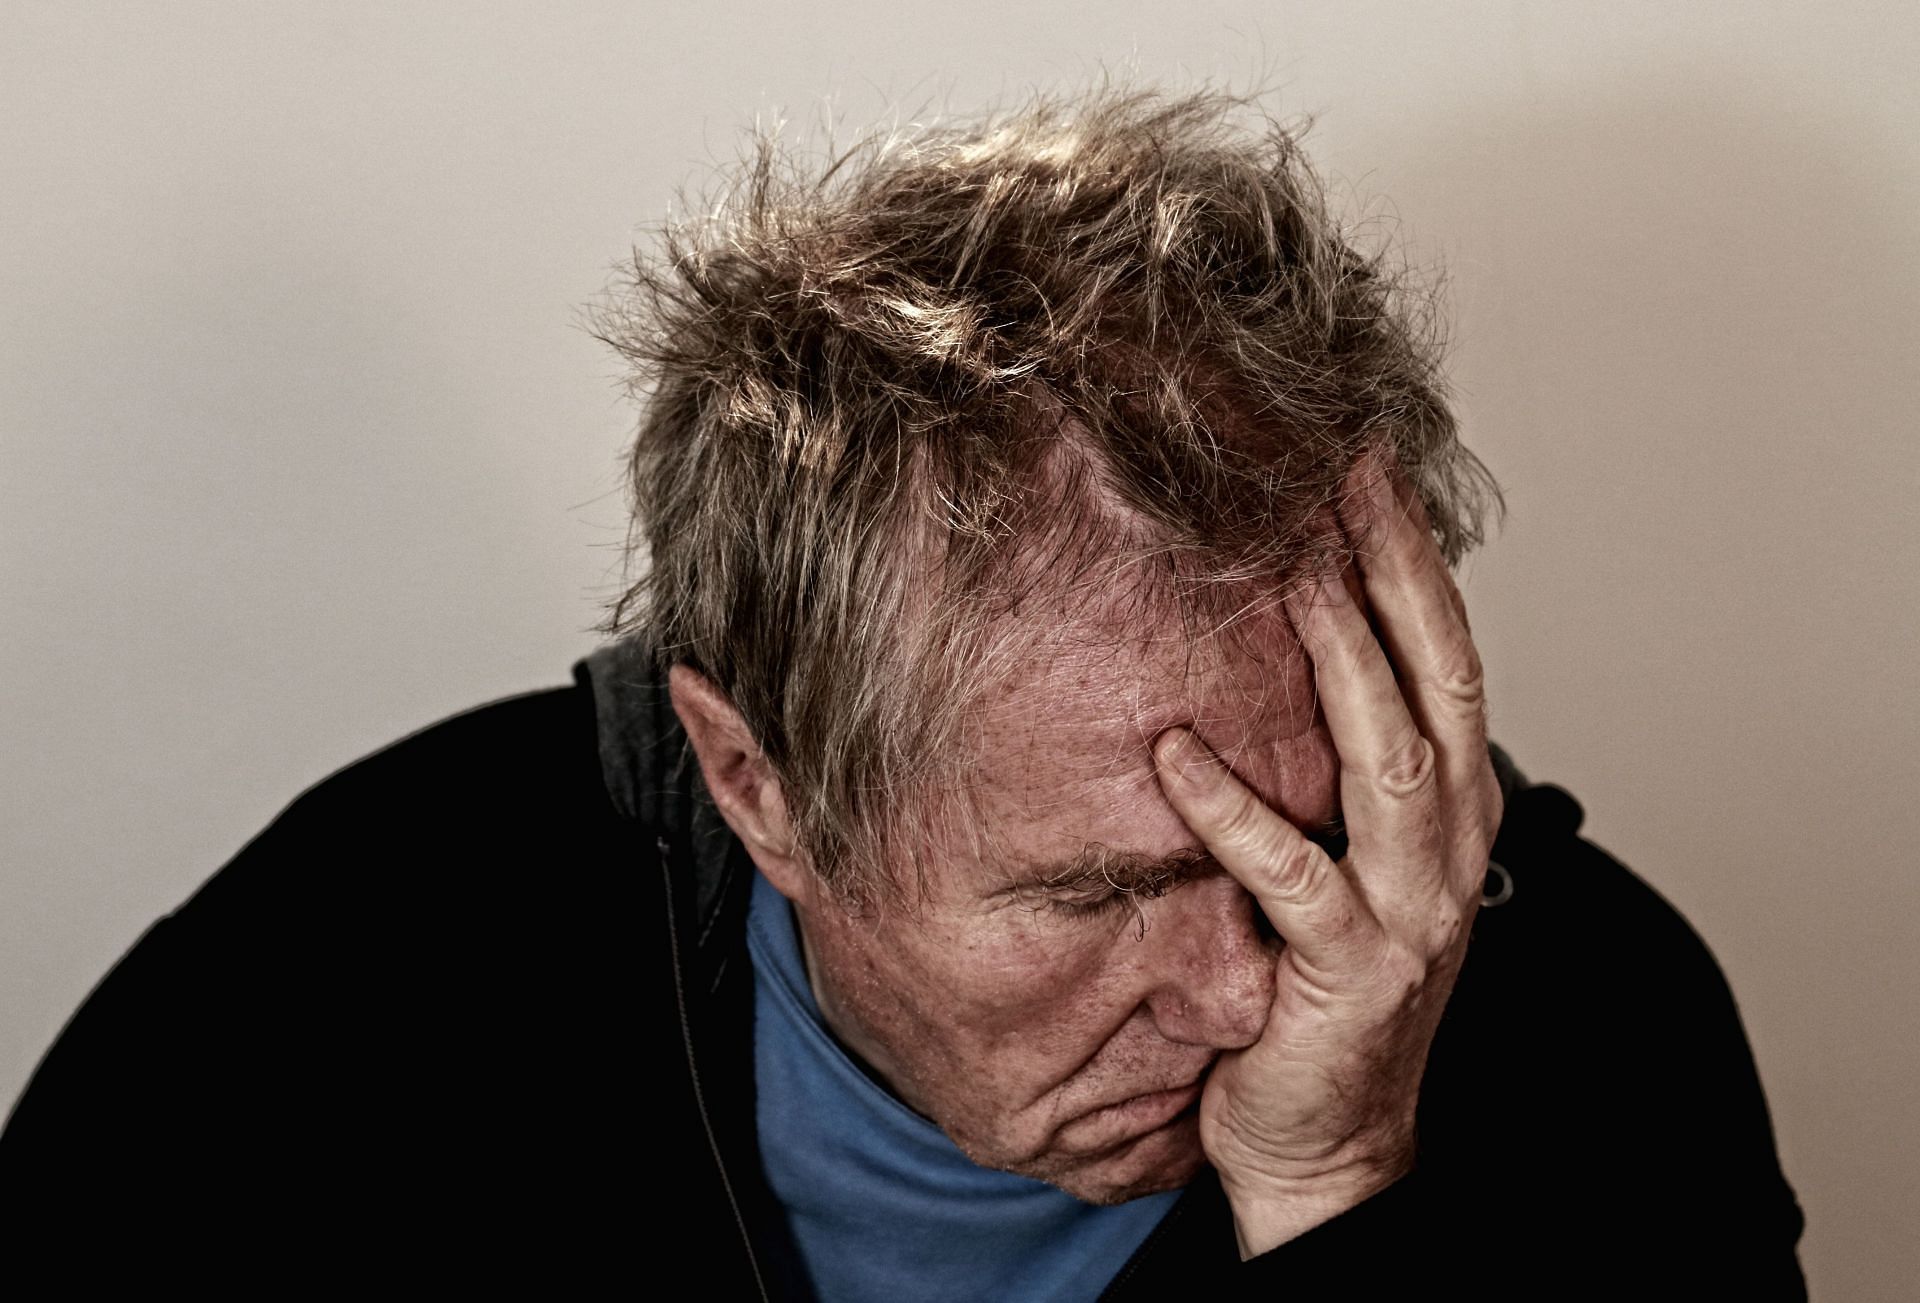 Depression caused by low testosterone levels (image sourced via Pexels / Photo by Gerd Altman)